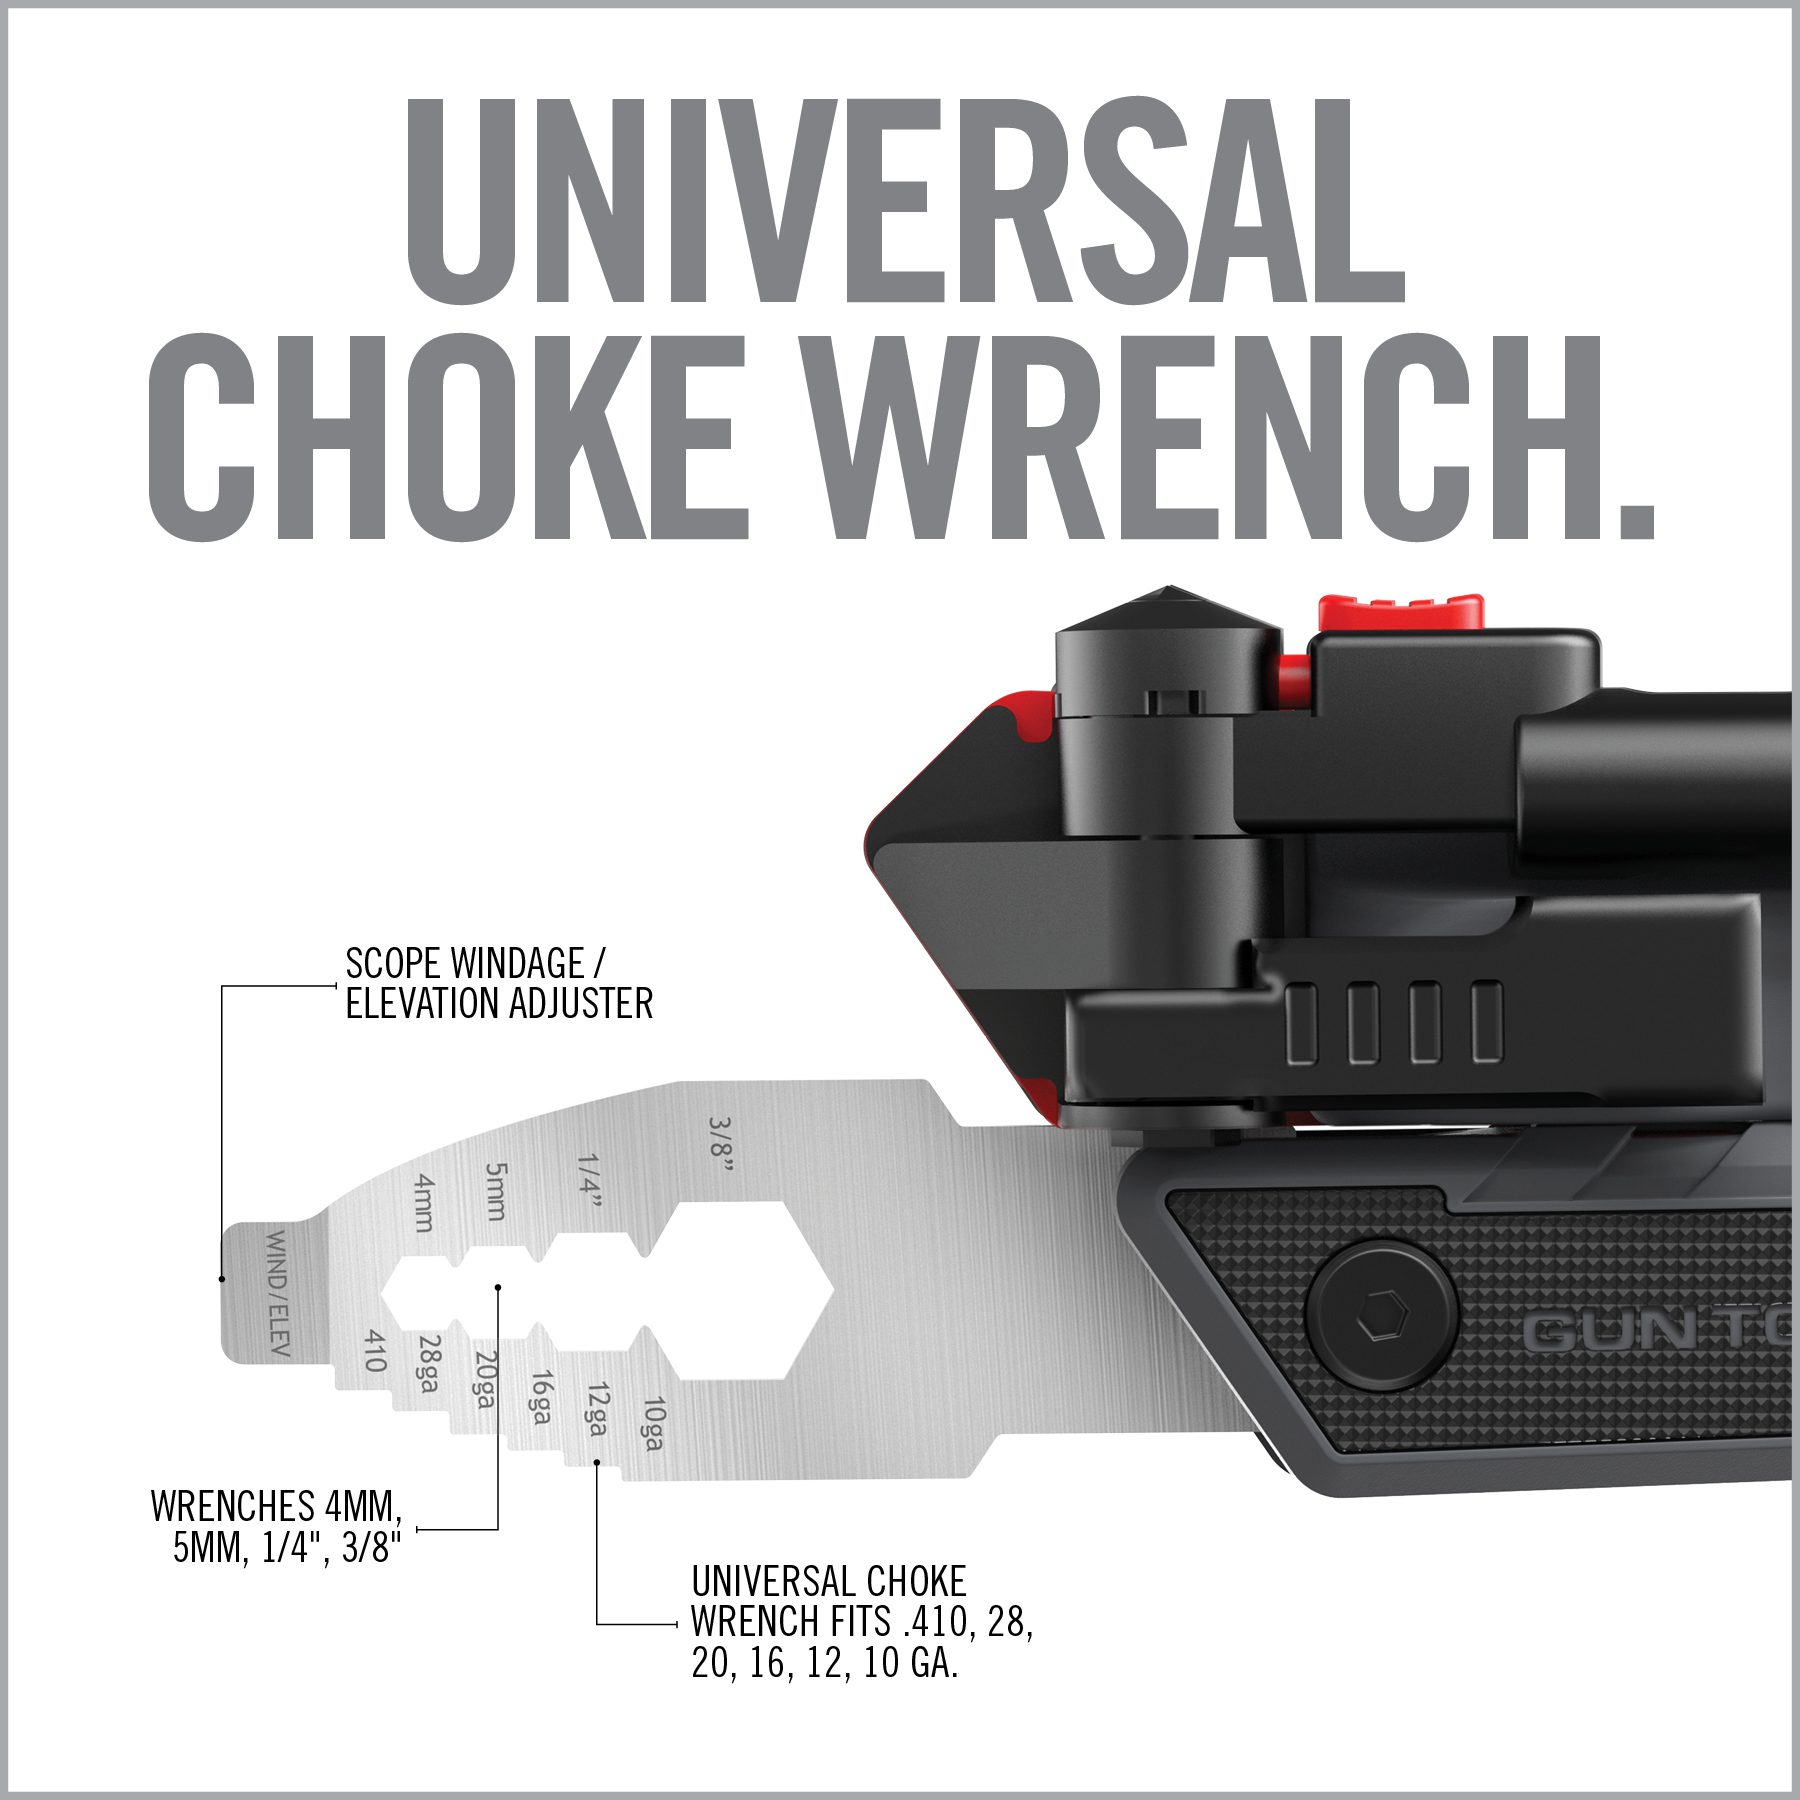 the universal choke wrench is shown with measurements